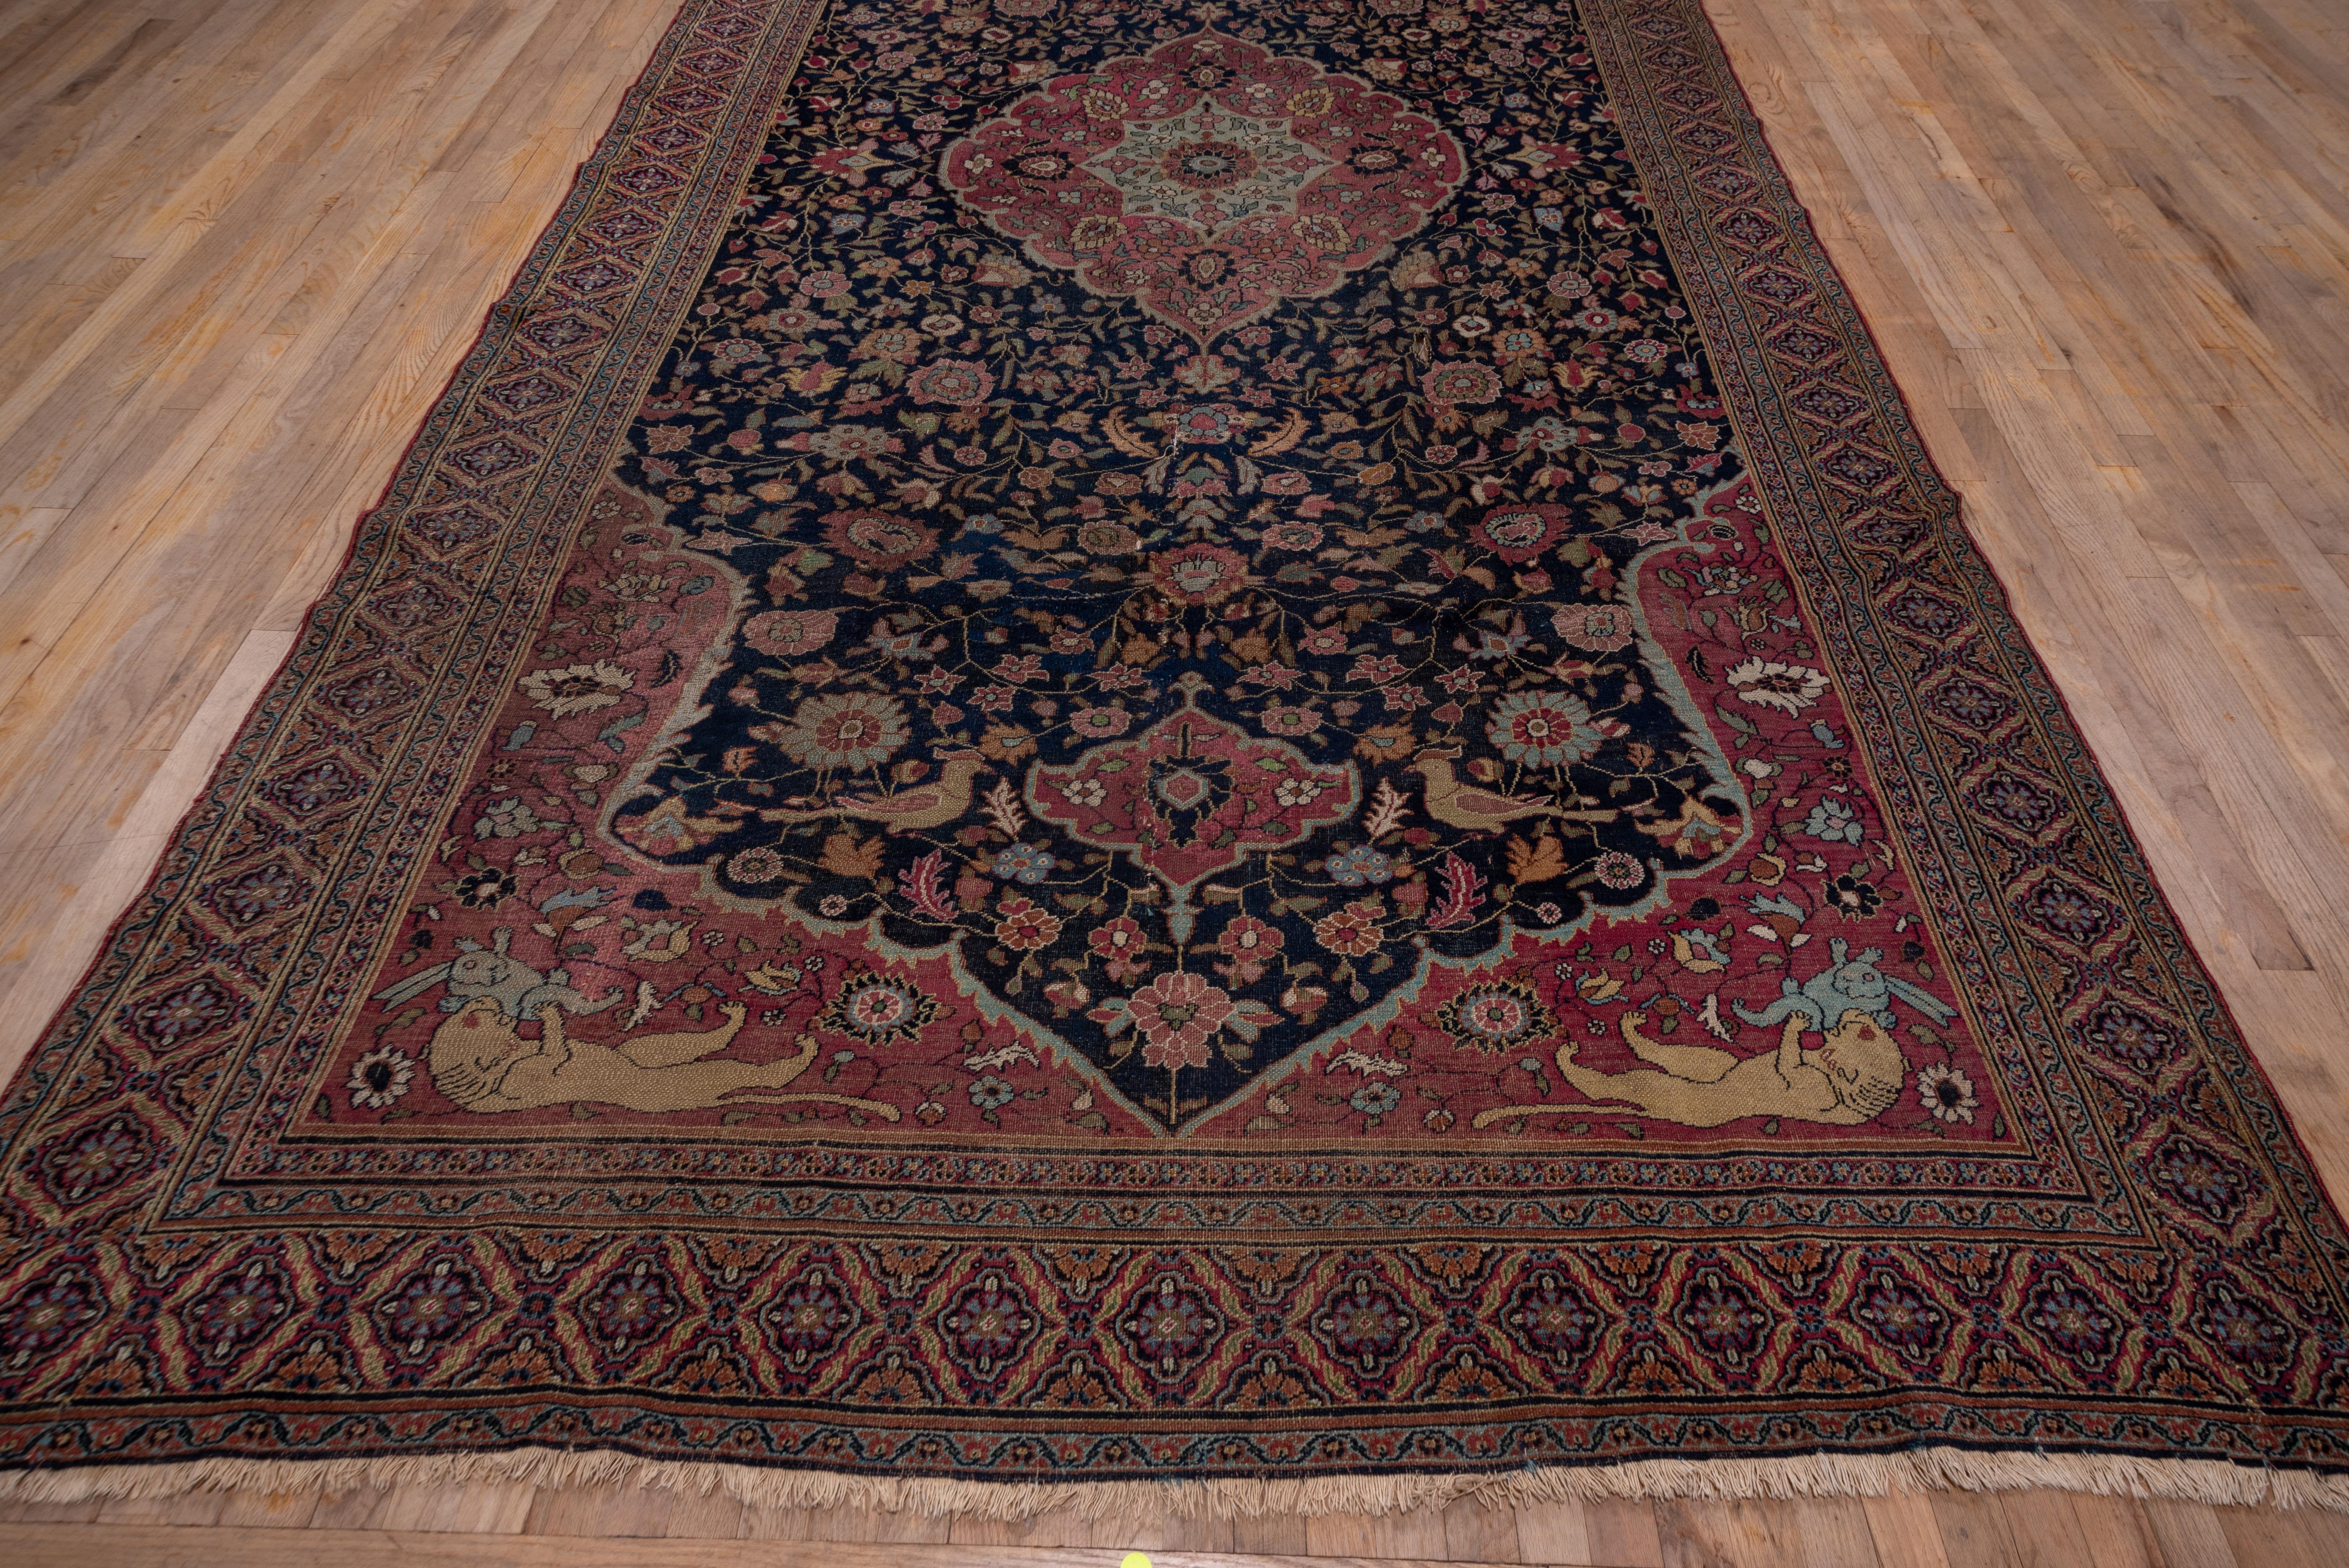 This antique northeast Persian carpet features a rose, gently lobed oval medallion with palmette accented central octogramme, set on a navy ground with birds, floral rinceaux and rose floating escutcheons. Lions pounce on hares in the rose field